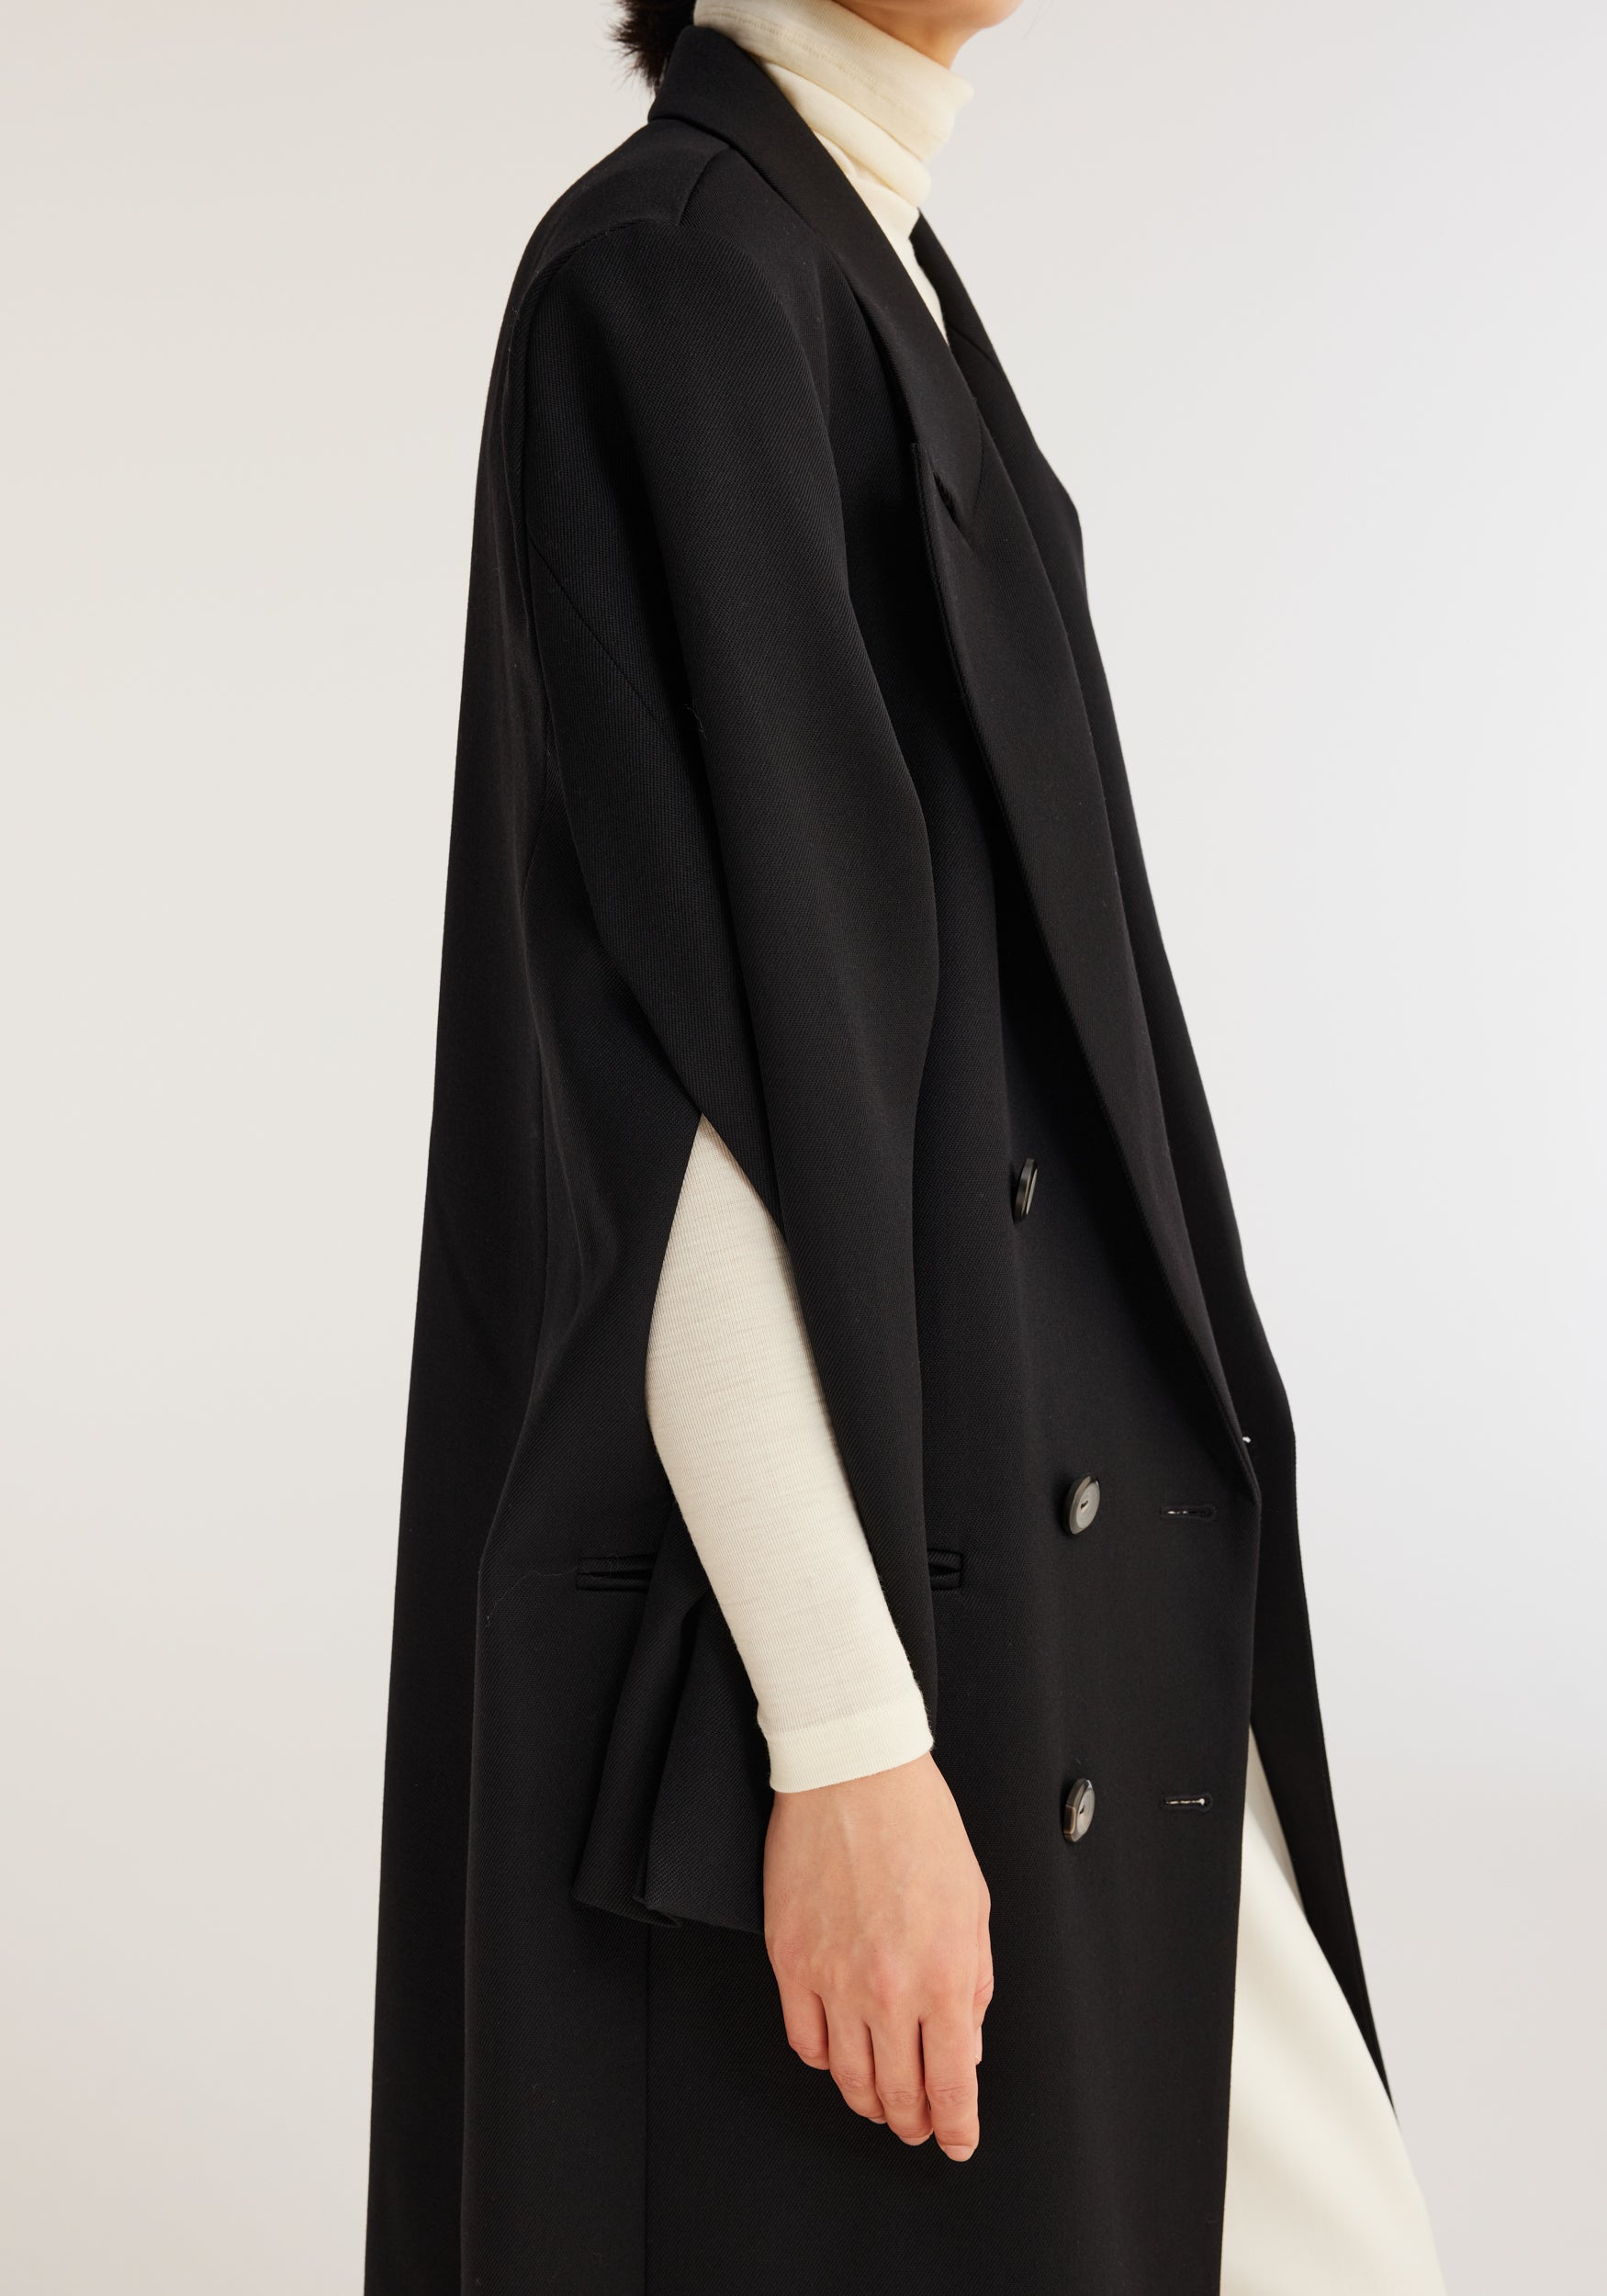 The Rohe Tailored Cap Coat in Noir available at The New Trend Australia